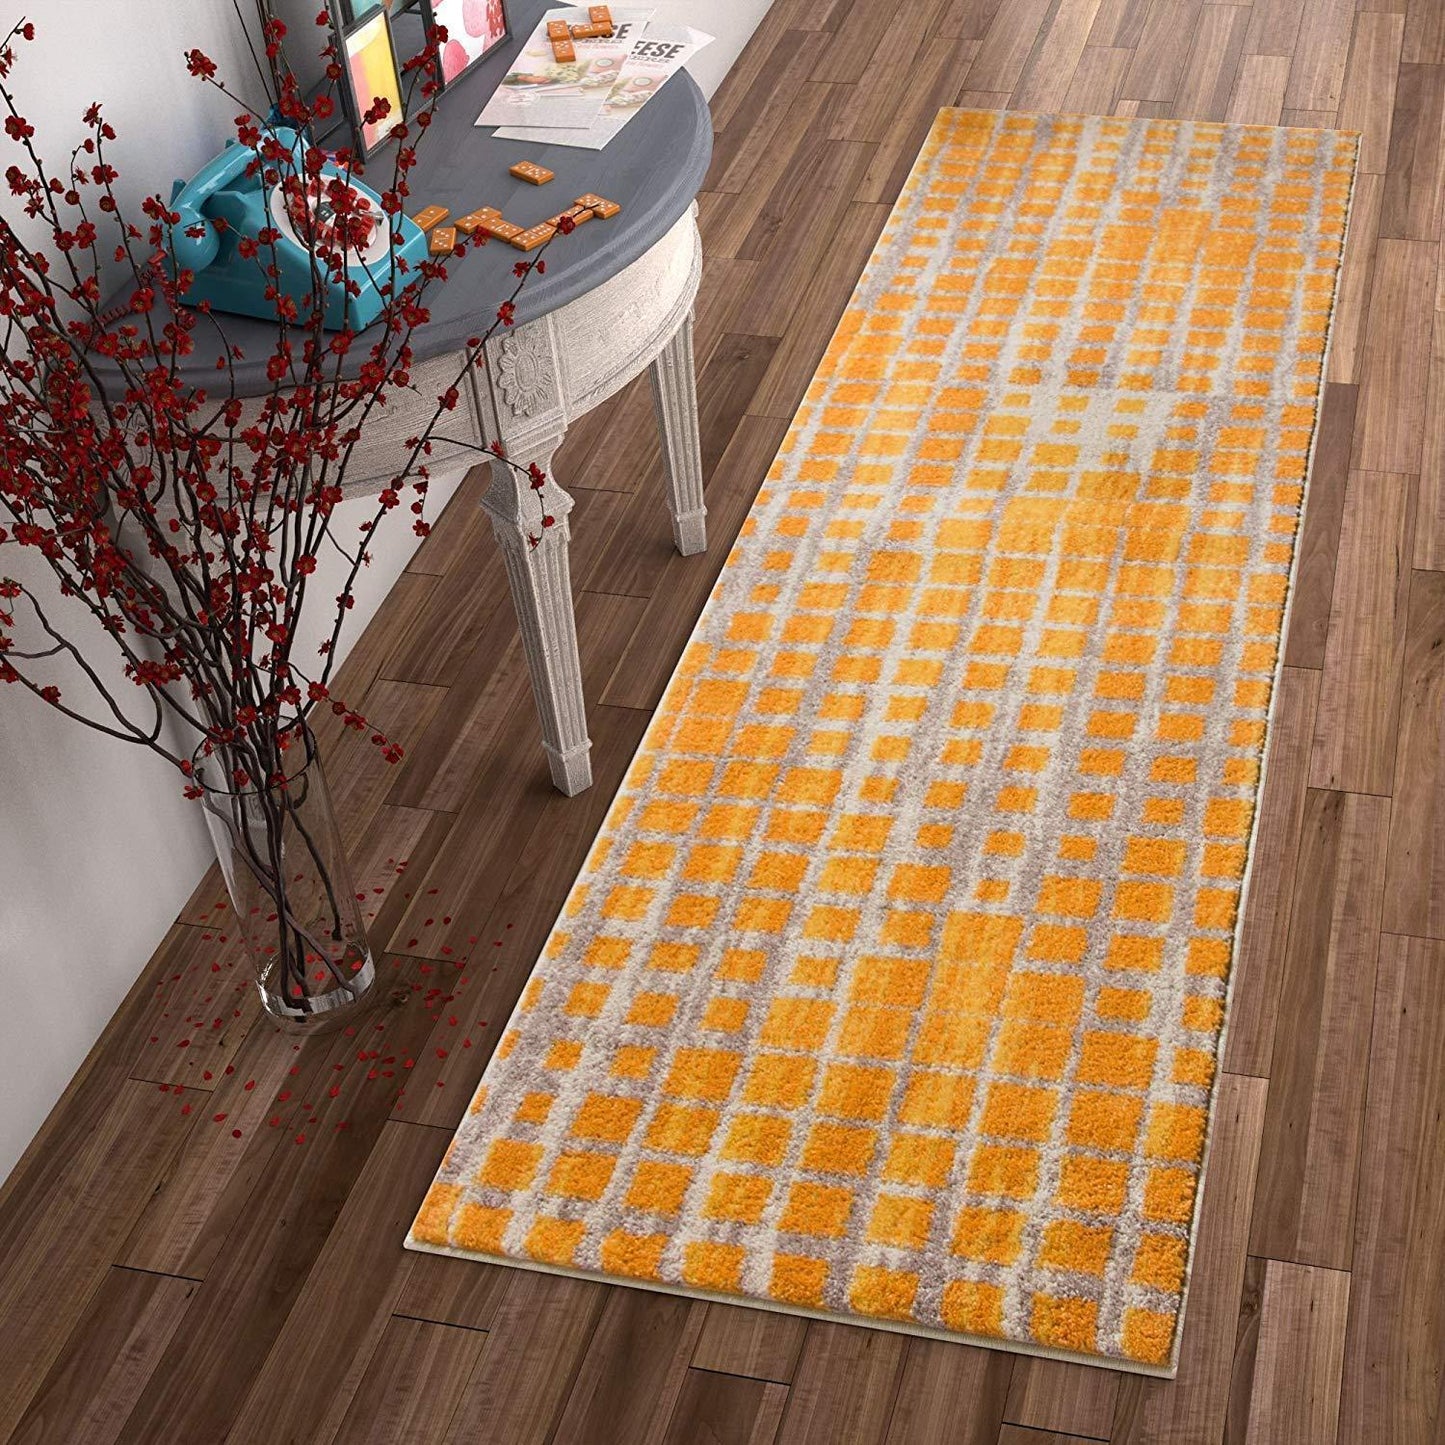 grand square yellow area rug 8x10, 8x11 ft Large Living Room Carpet, Bedroom, Kitchen